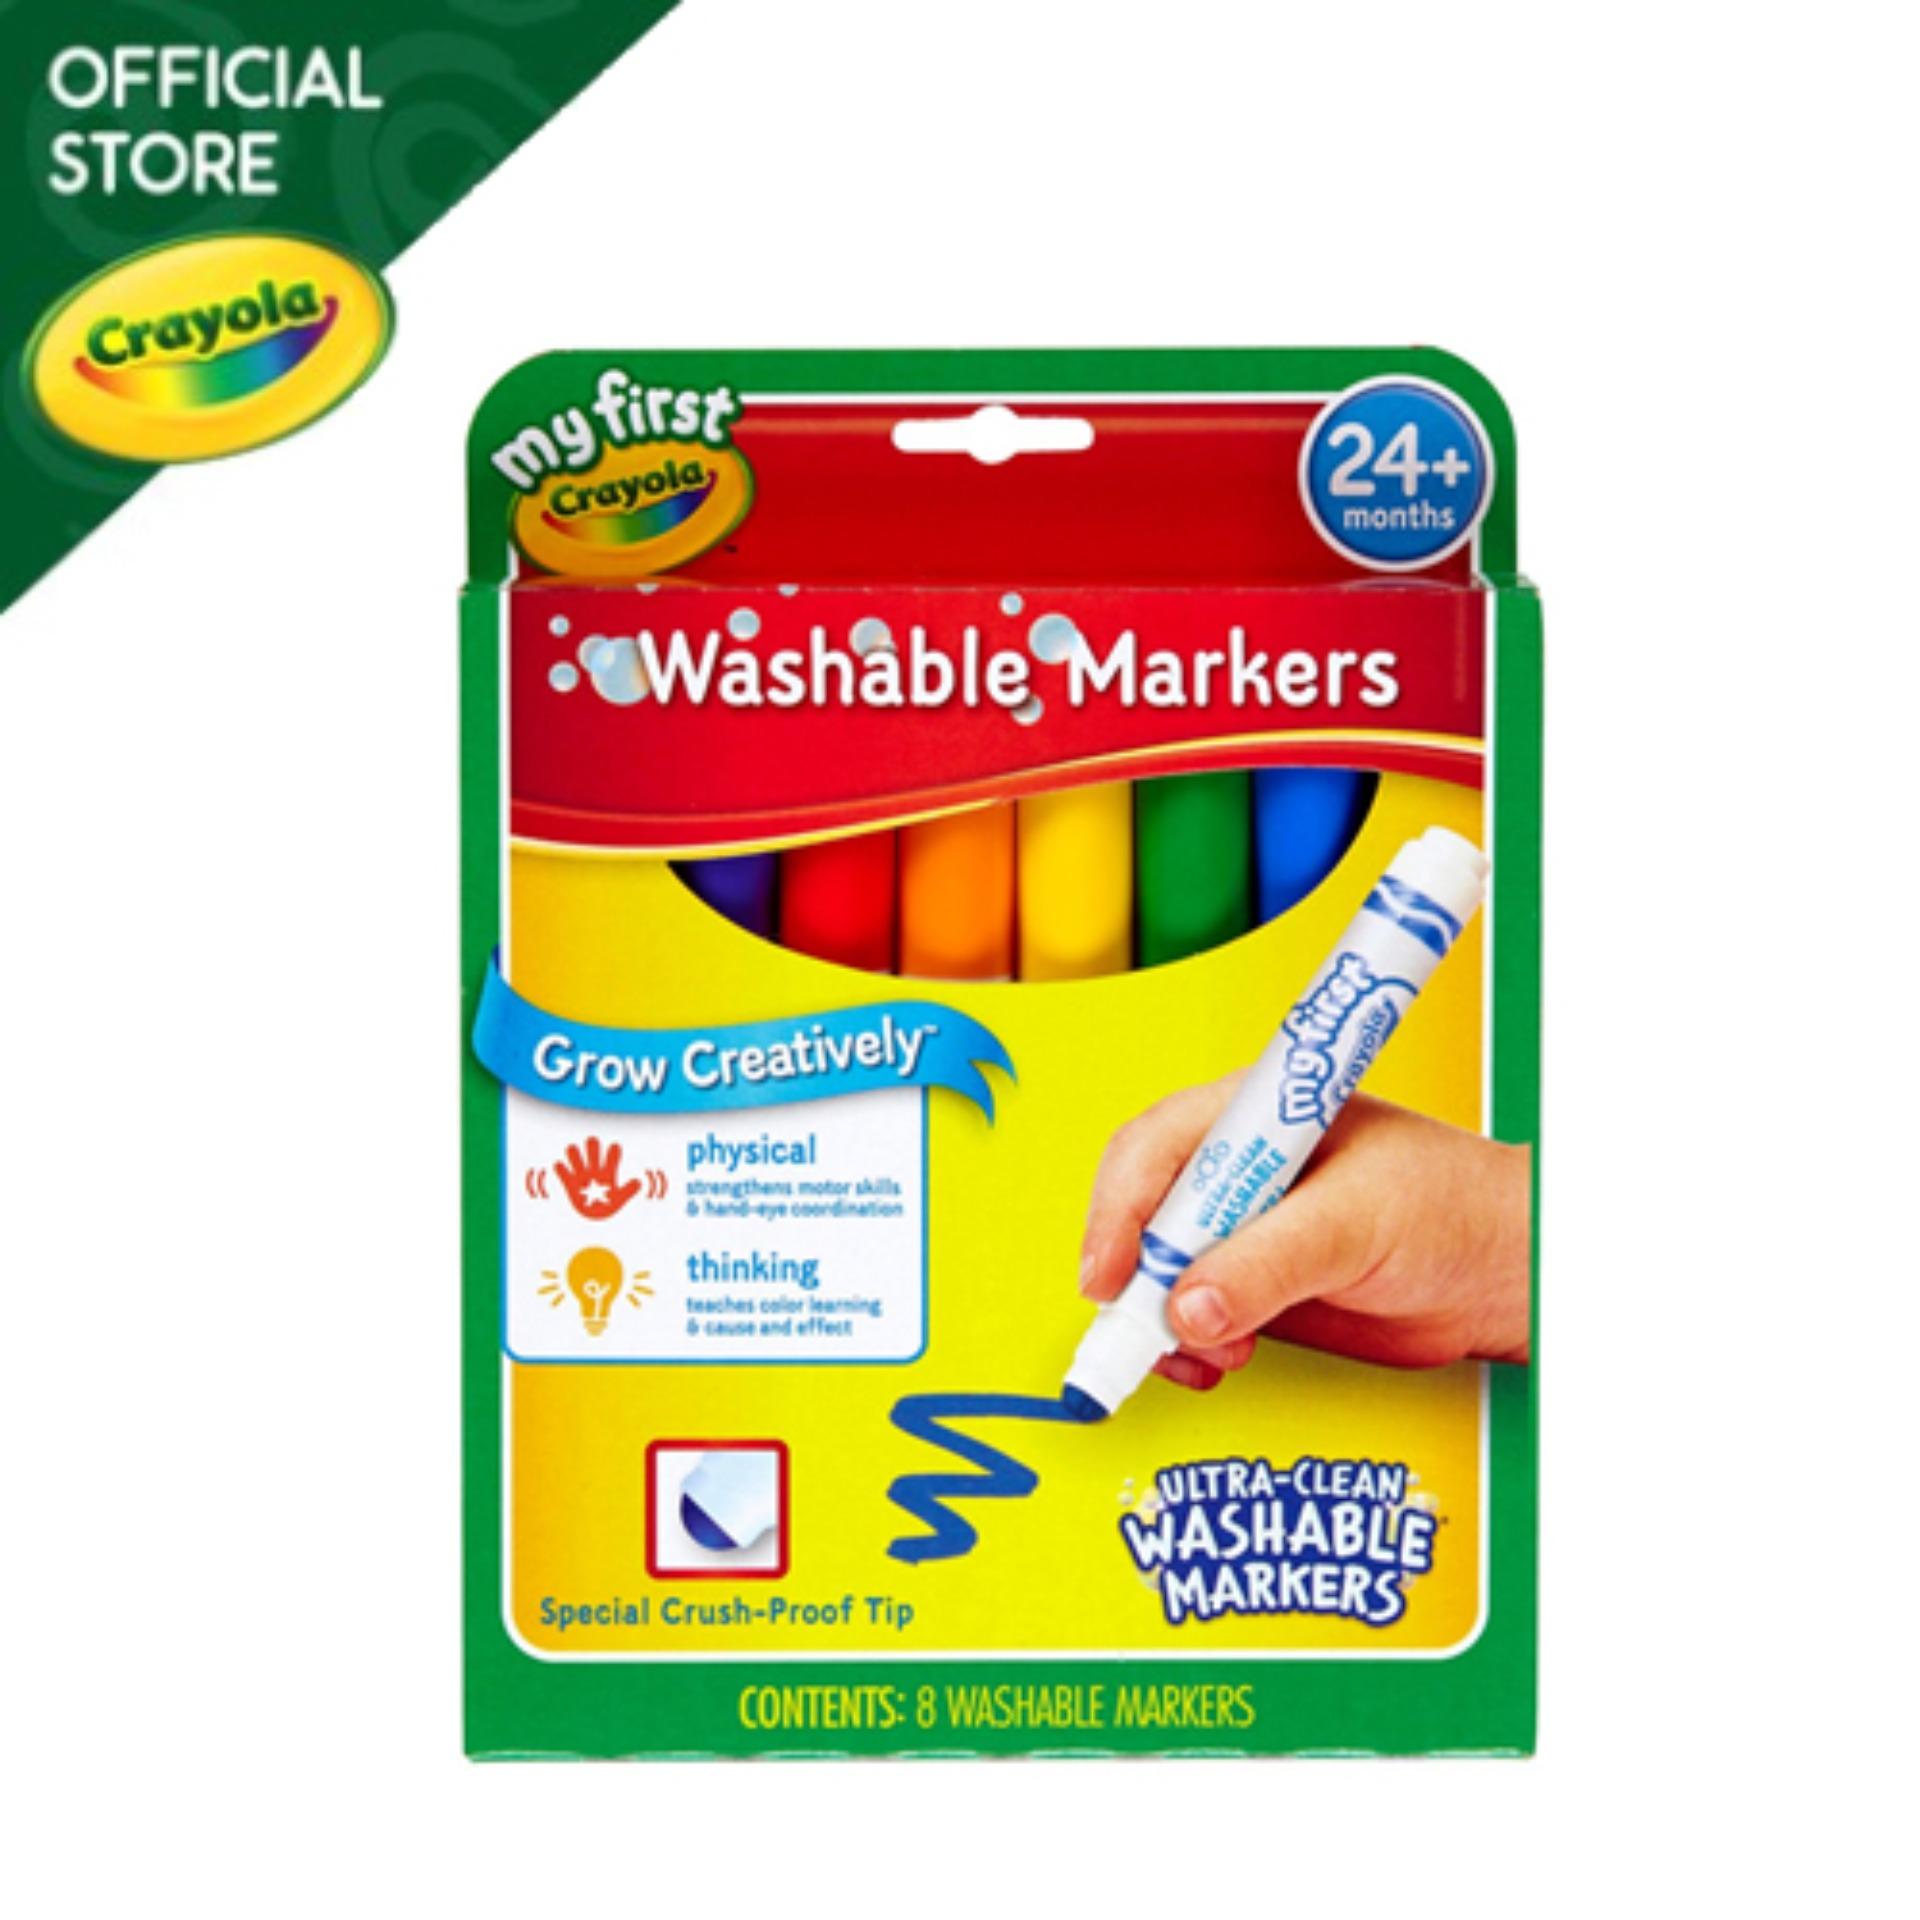 My First Crayola Washable Markers 8 Count - 